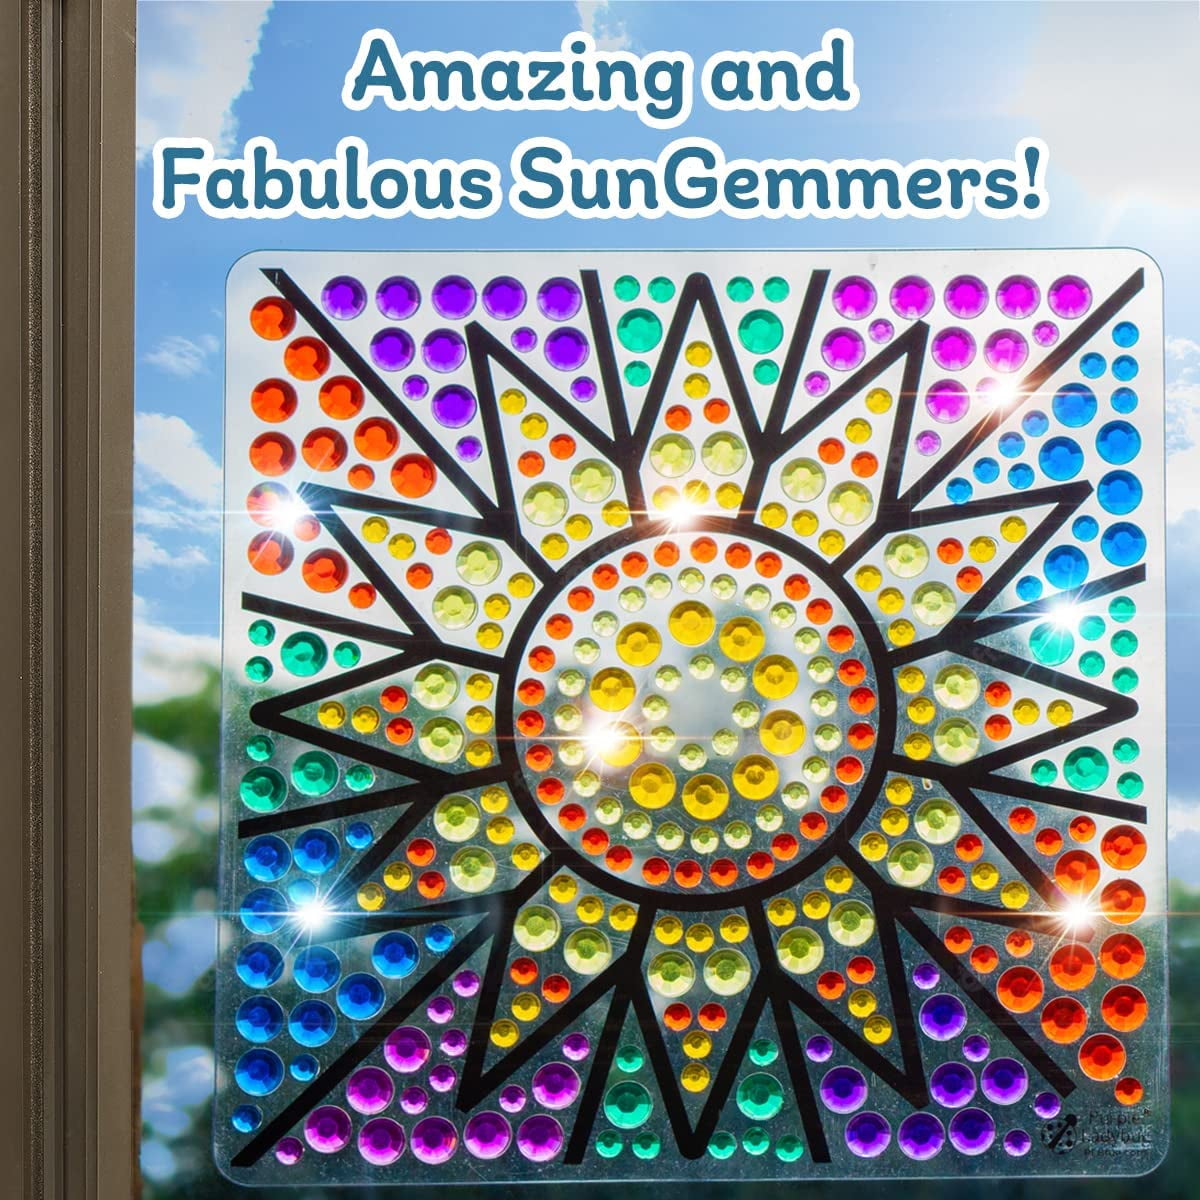 Diamond Gem Art Stickers Kit for Kids, Suncatchers Fun Arts and Crafts for  Girls Ages 6-8 Gifts 